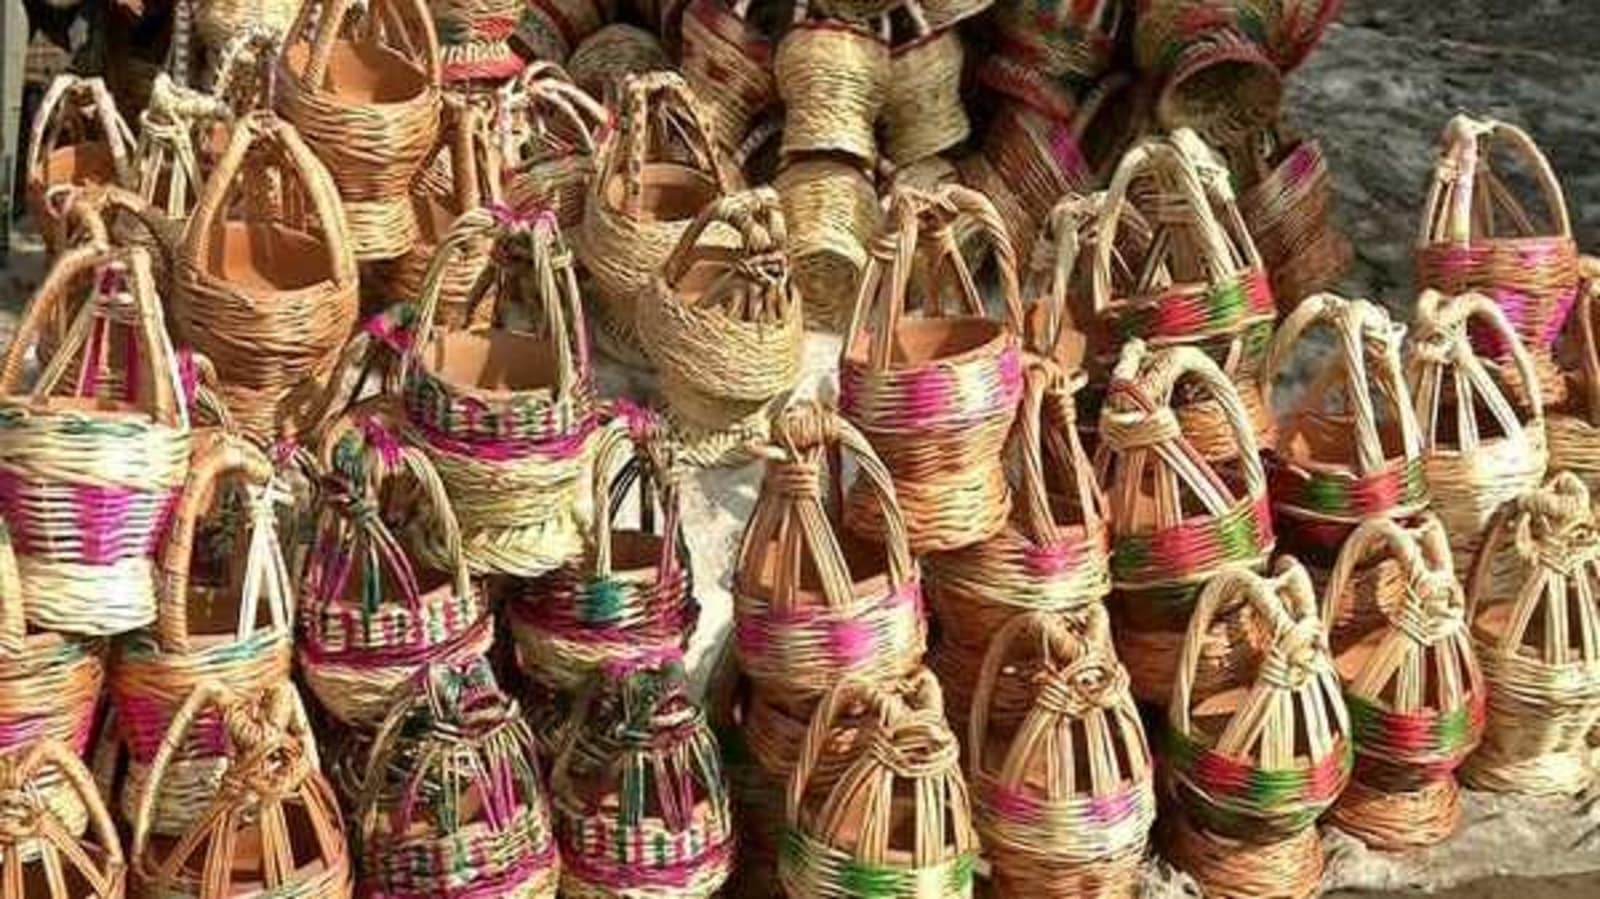 Kangri' sales go up as cold grips Kashmir valley - Hindustan Times